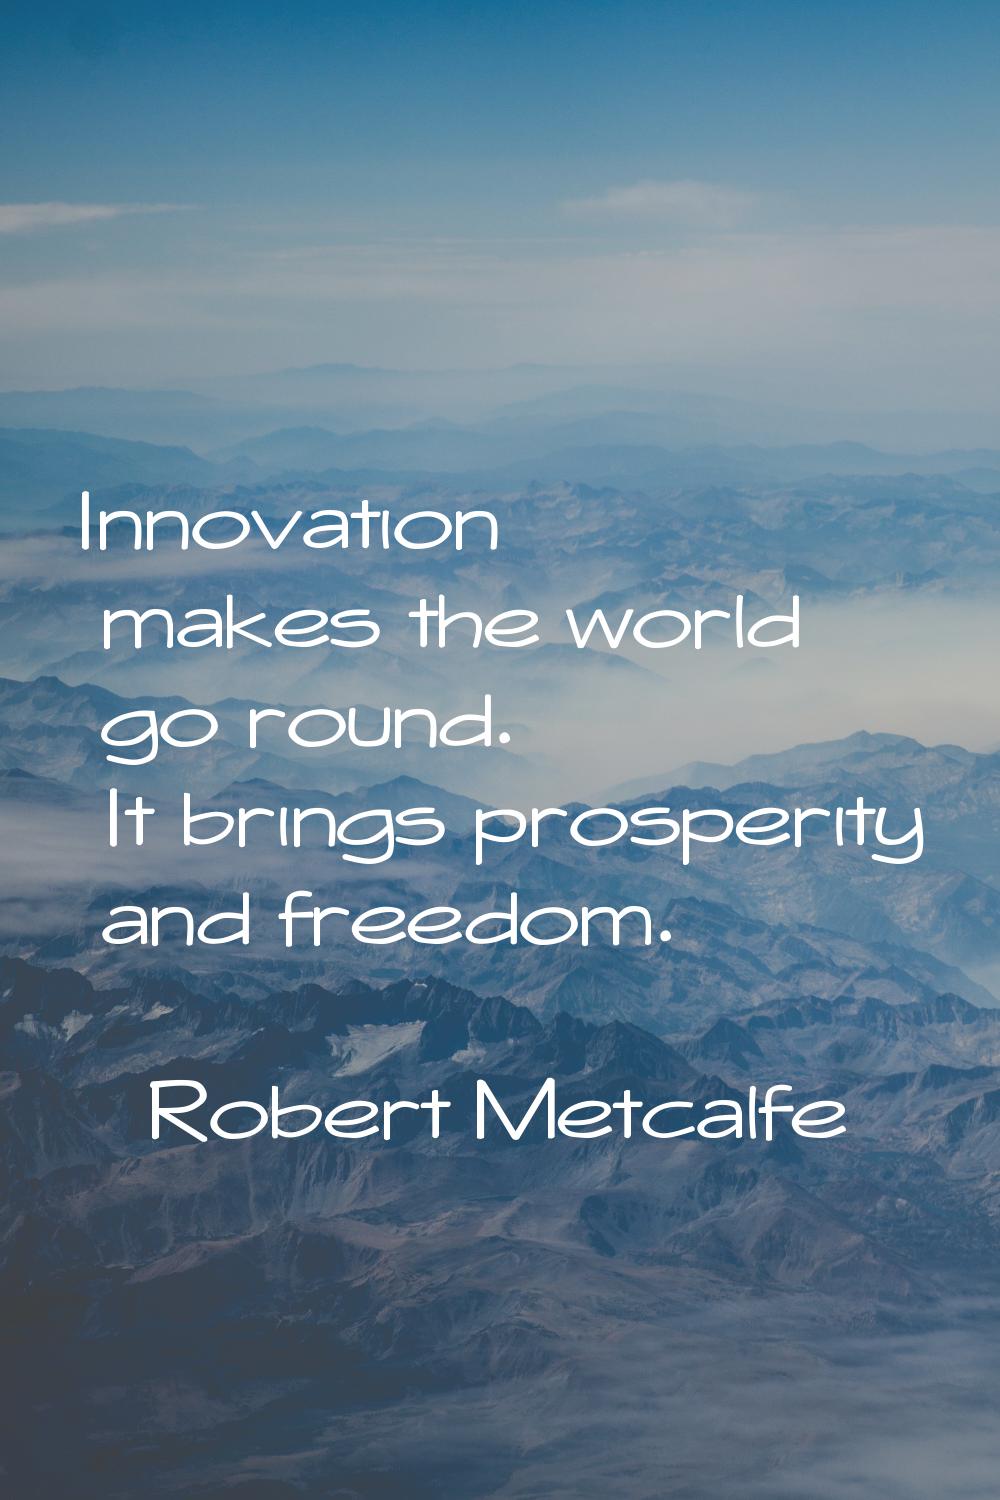 Innovation makes the world go round. It brings prosperity and freedom.